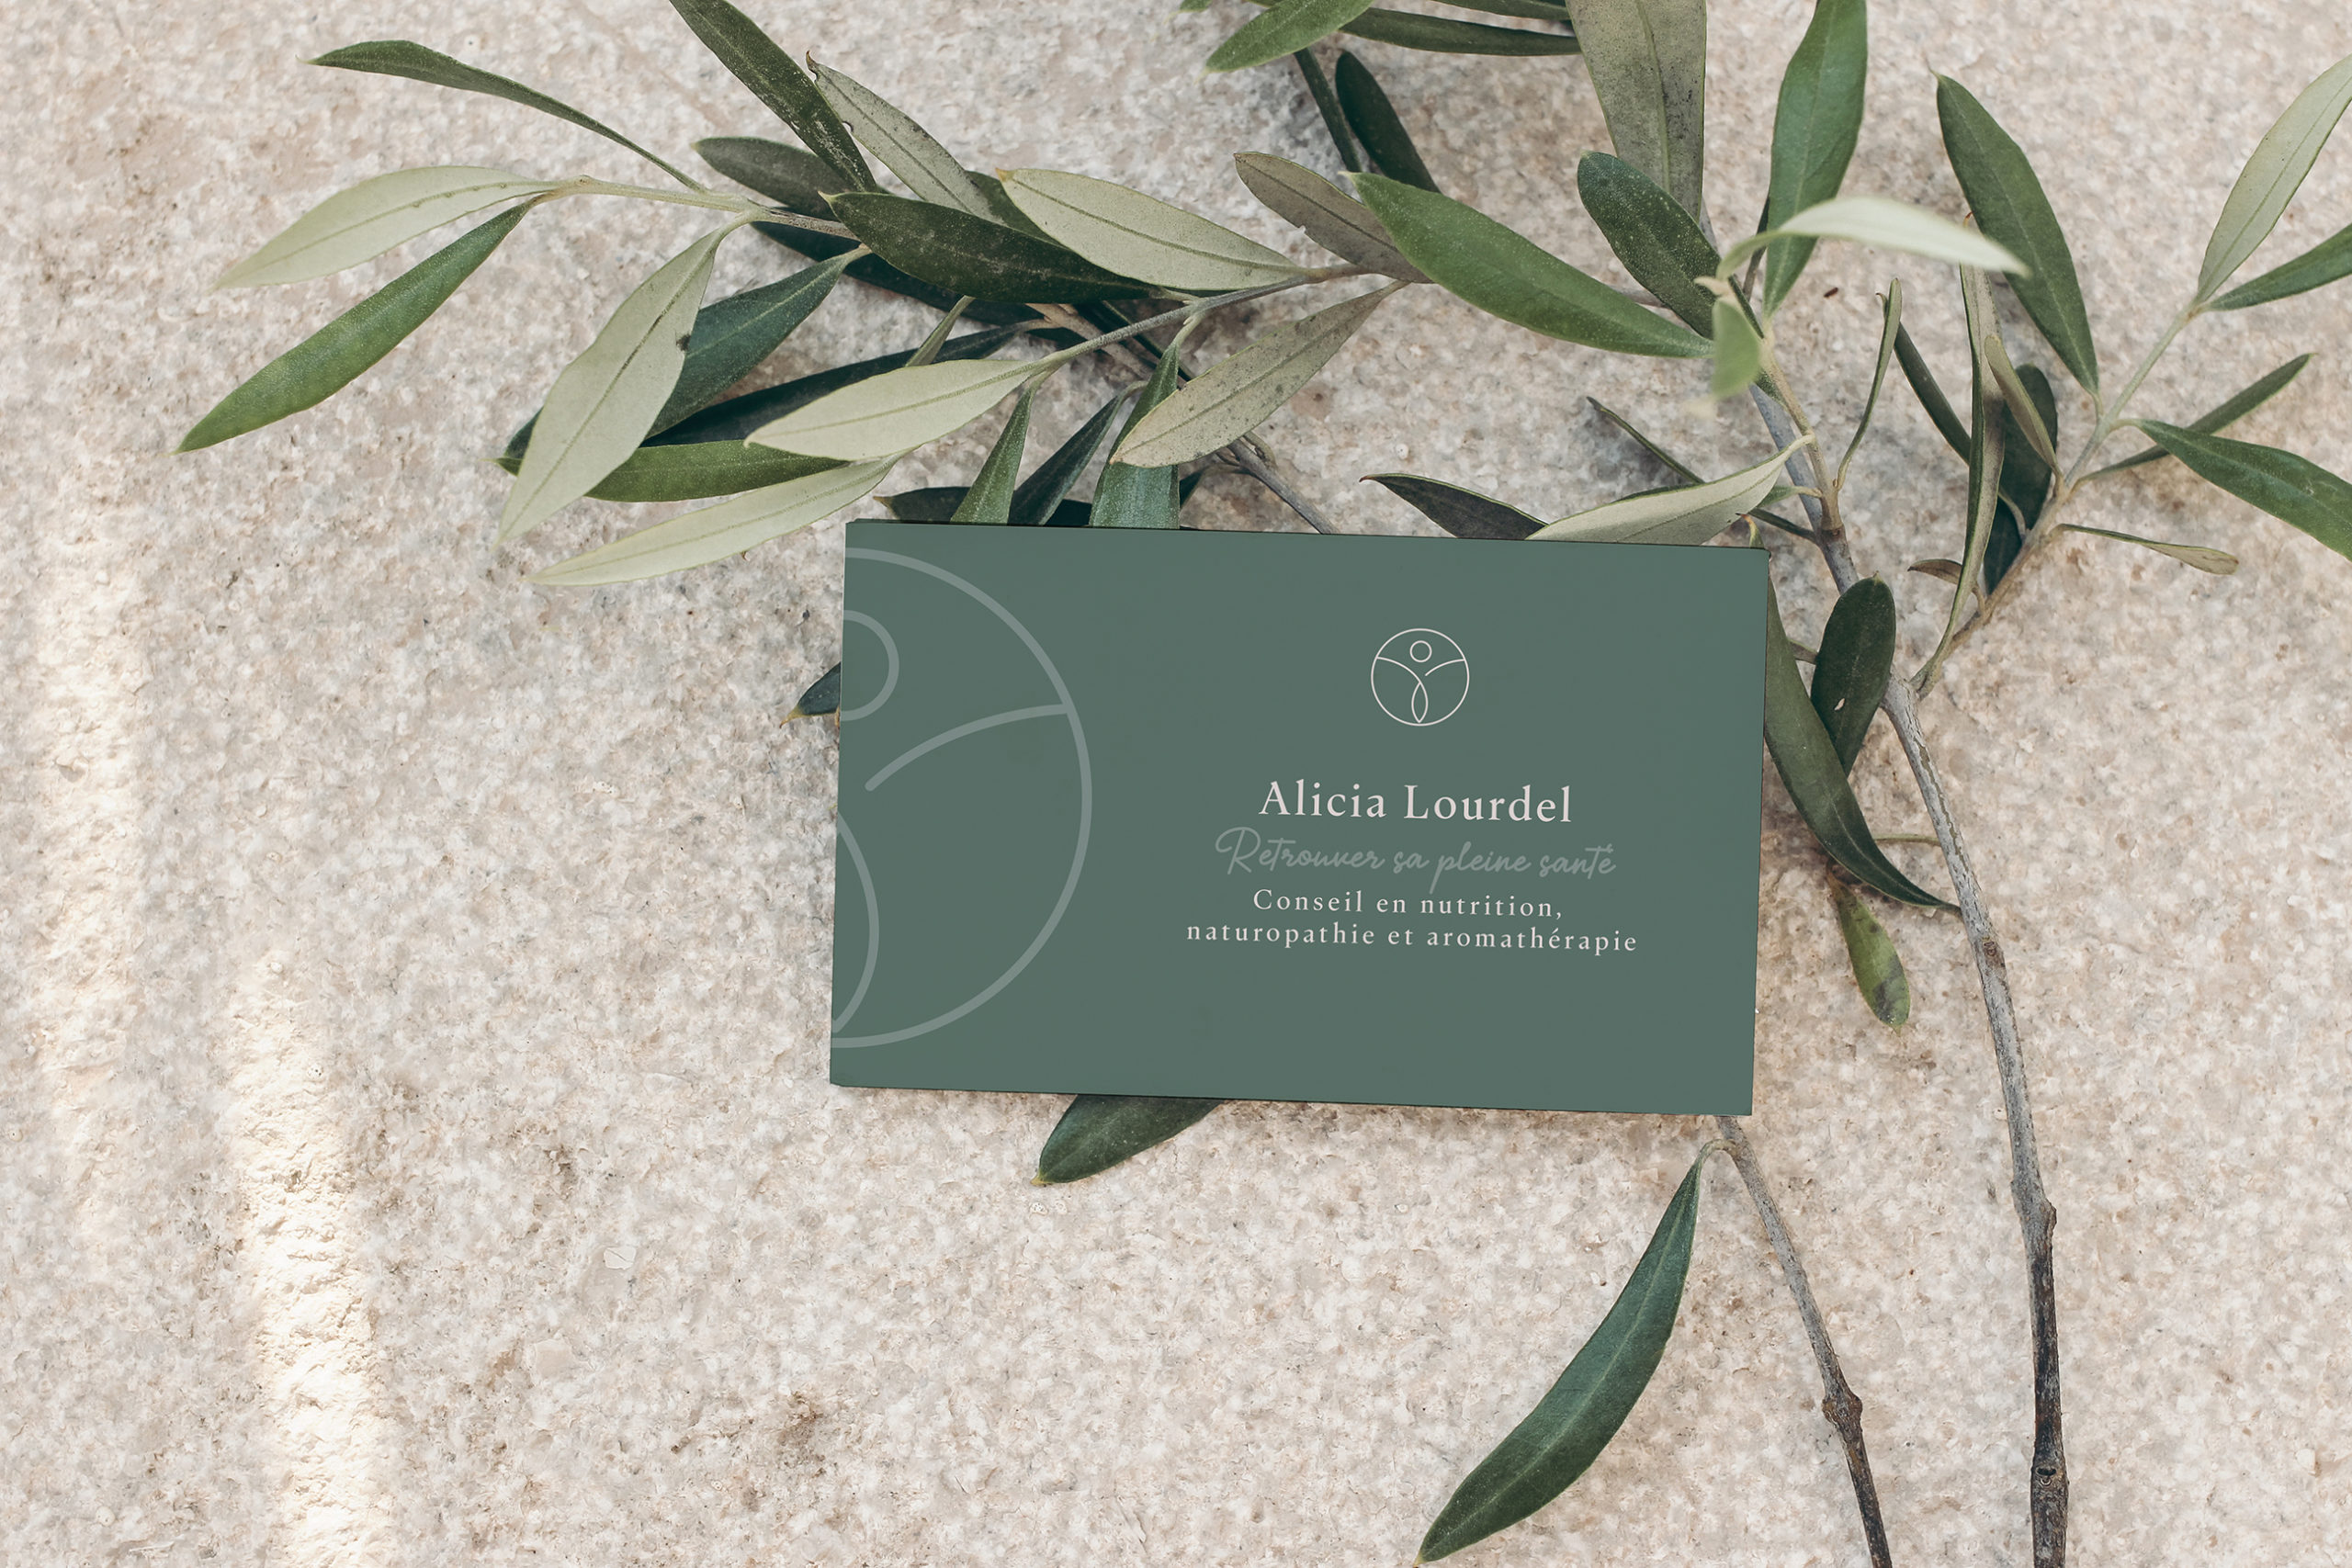 Summer stationery mockup scene,. Blank business card on concrete floor. Textured background with olive tree branch. Mediterranean design. Branding concept. Flat lay, top view, no people.